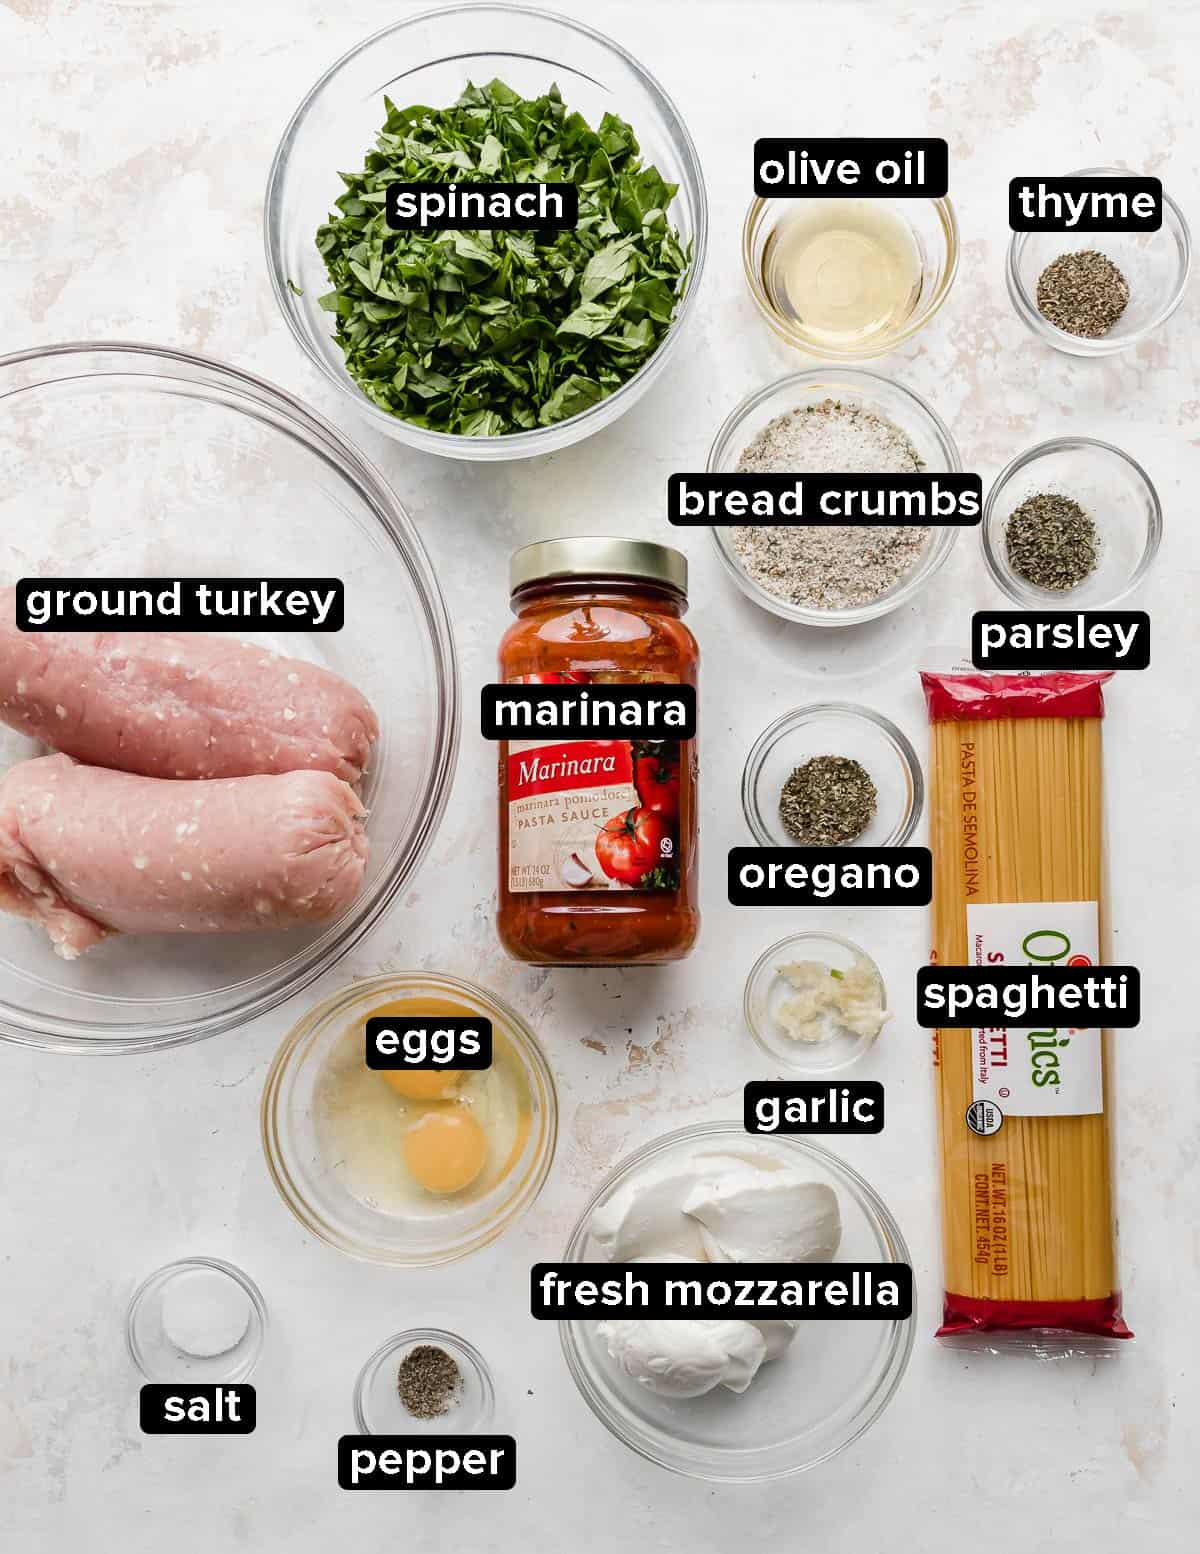 Ingredients used to make Turkey Spinach Meatballs and Spaghetti portioned into glass bowls placed on a white background.